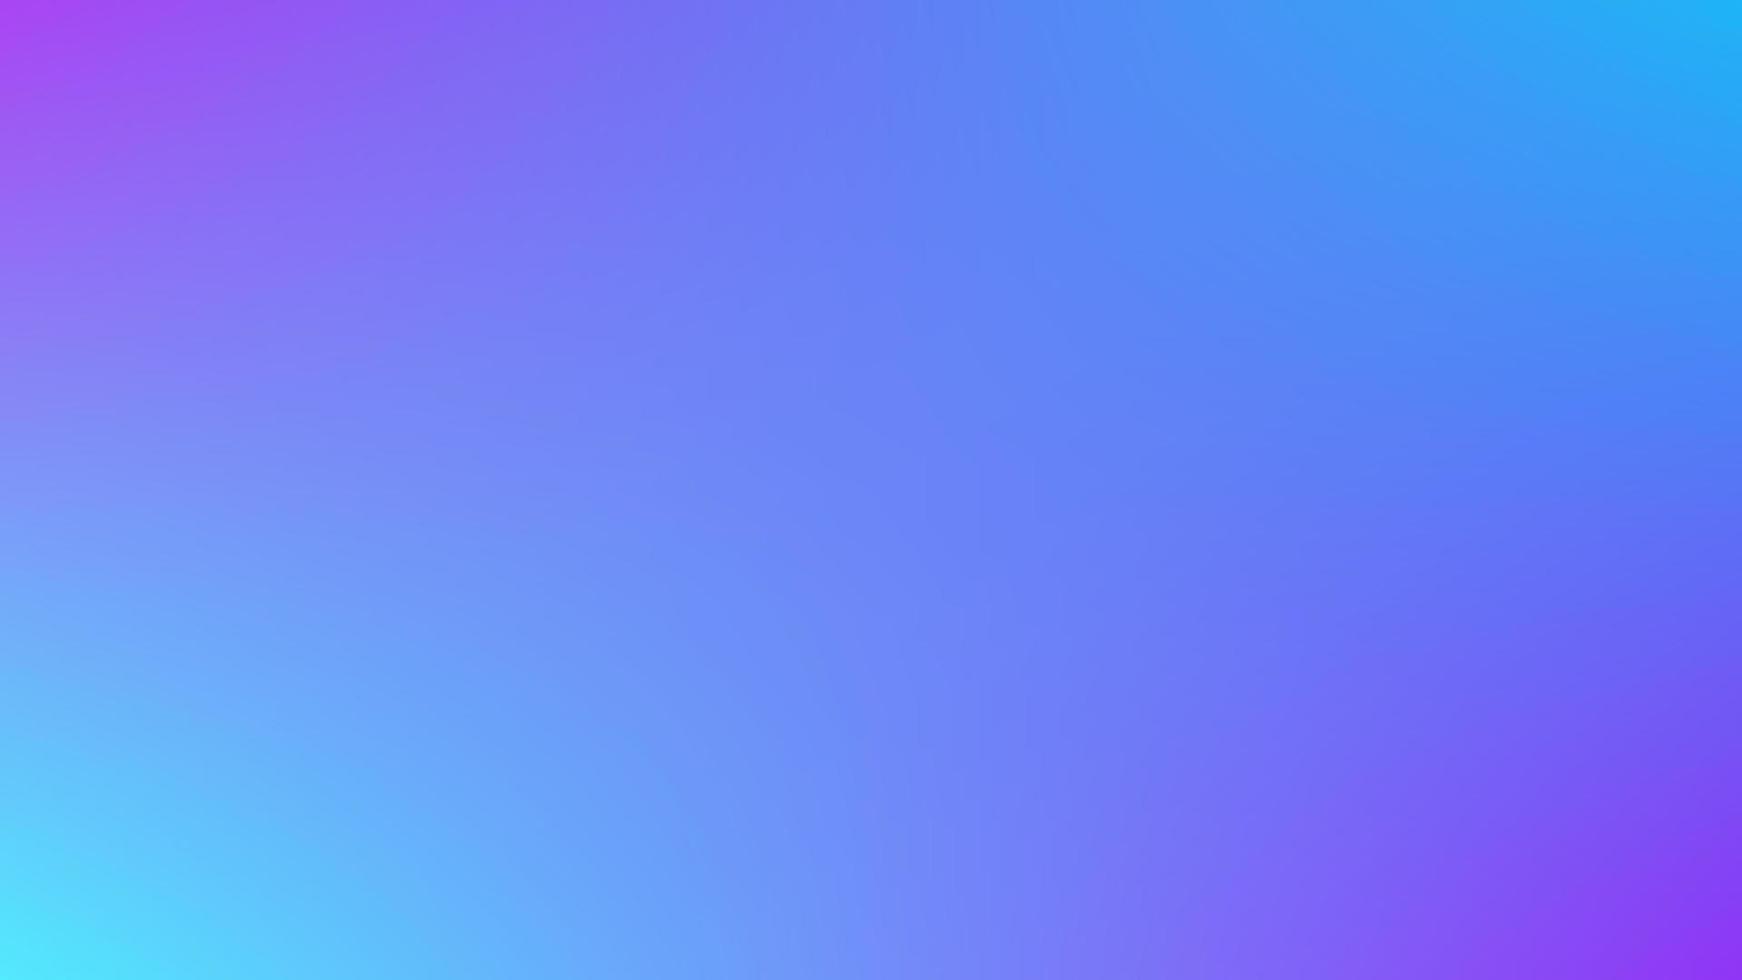 light blue and purple gradient background vector